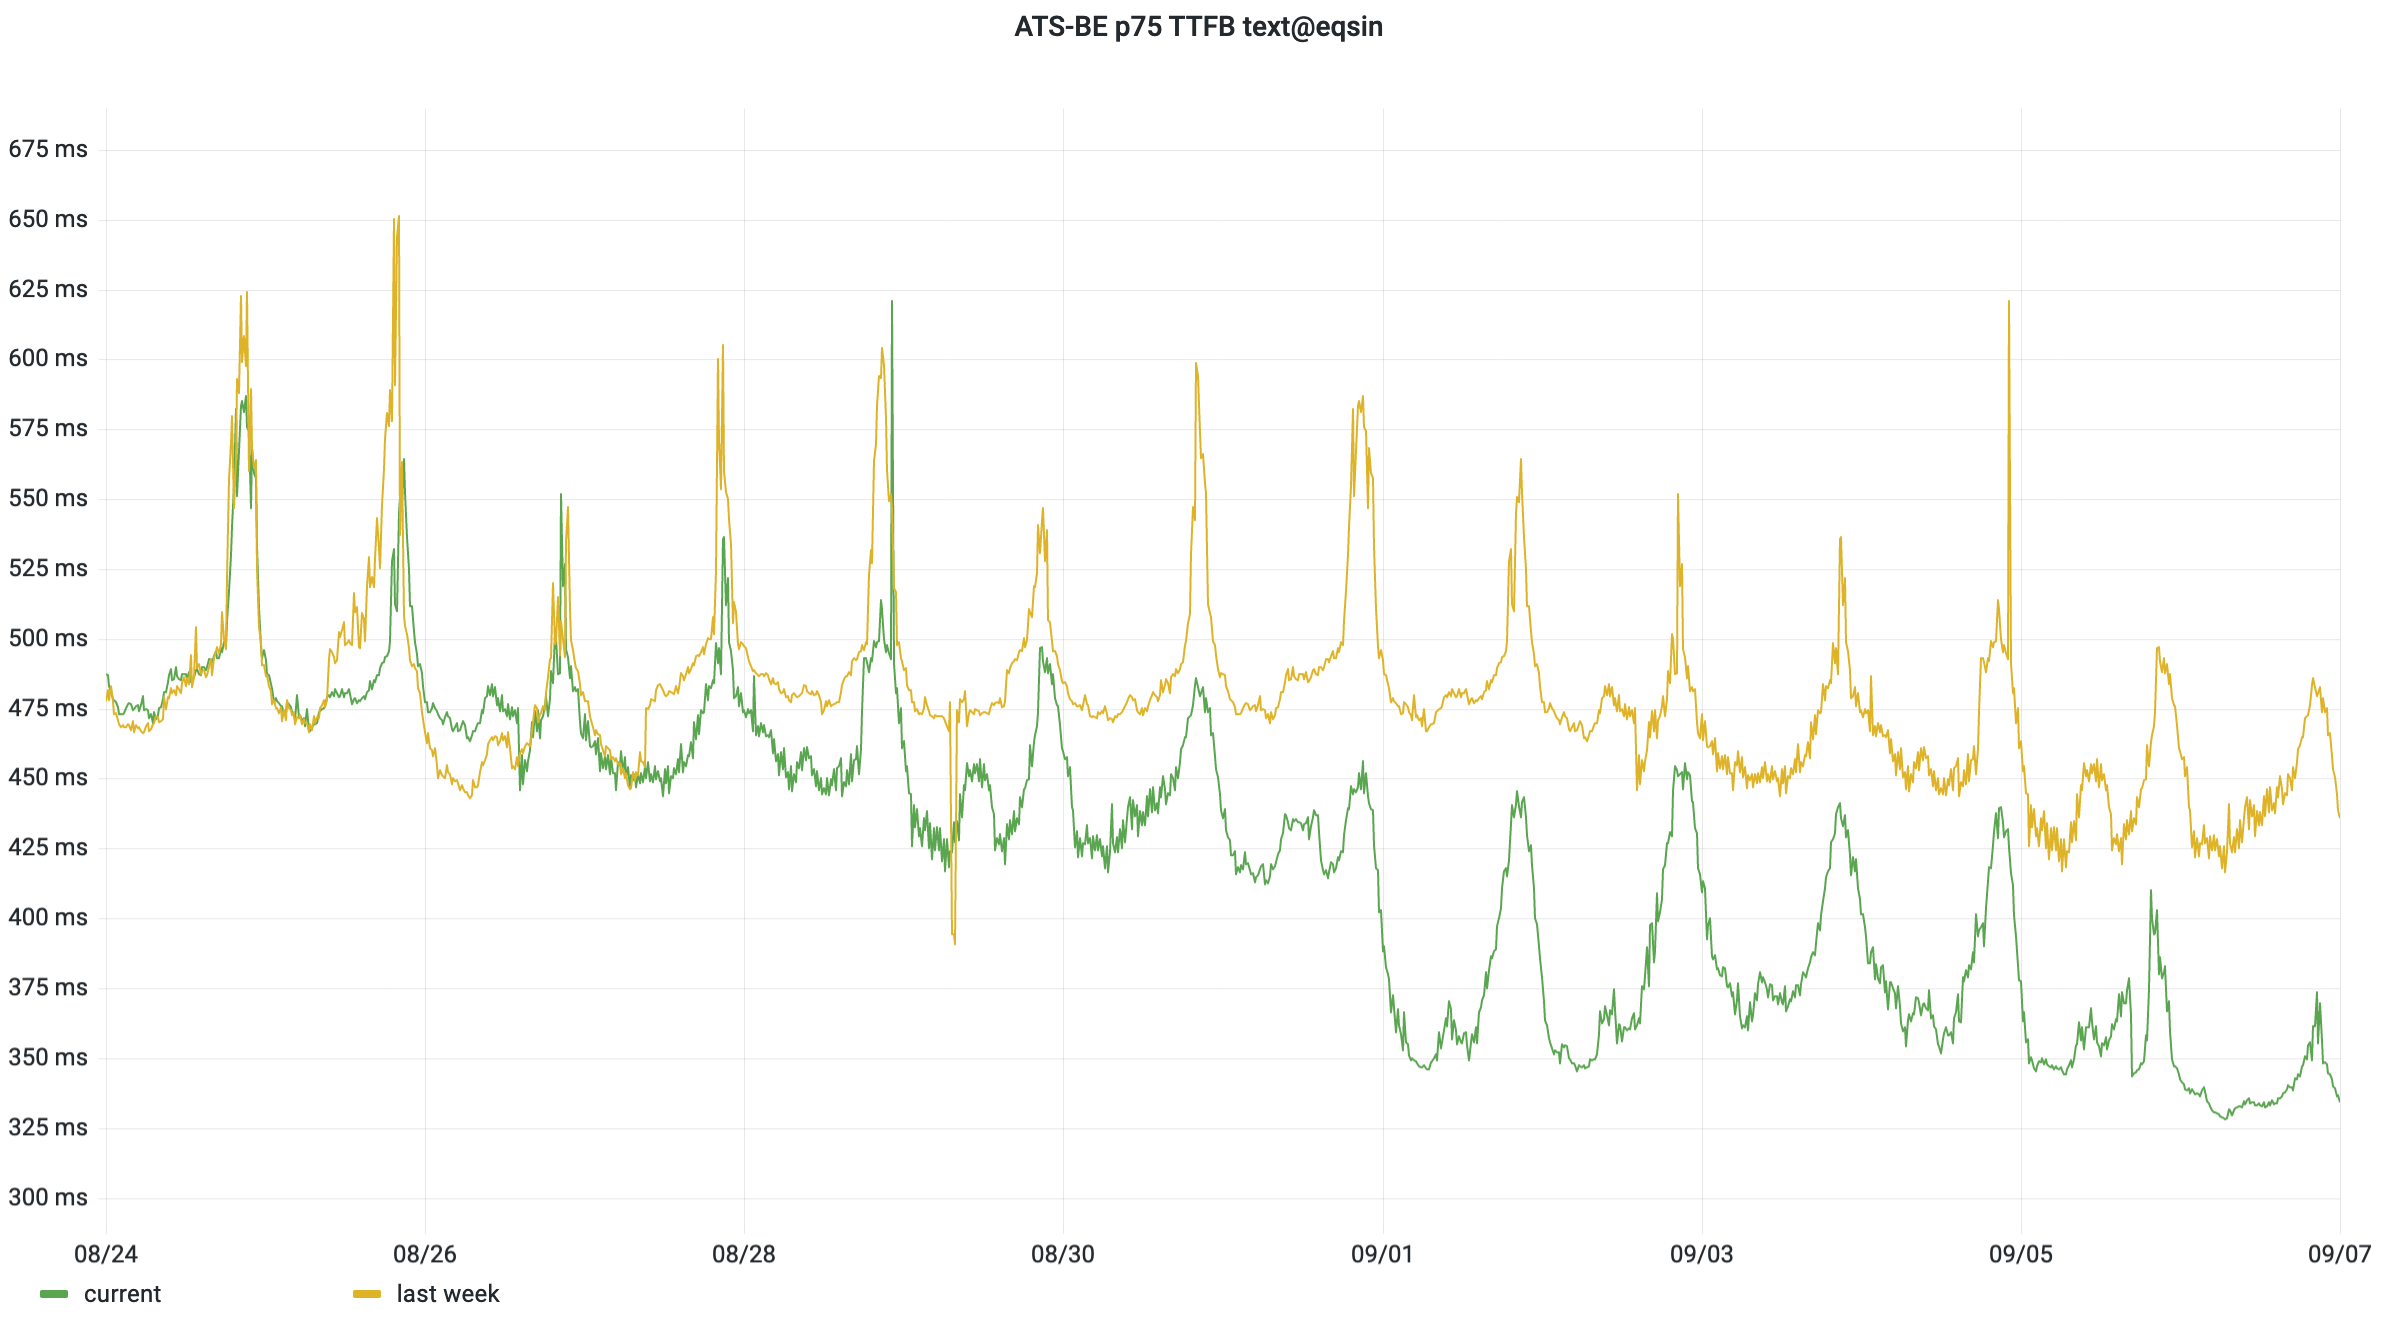 Plot of p75 ATS backend latency in September 2022. The week before it swung around 475 ms, then it dropped down to 350ms.
